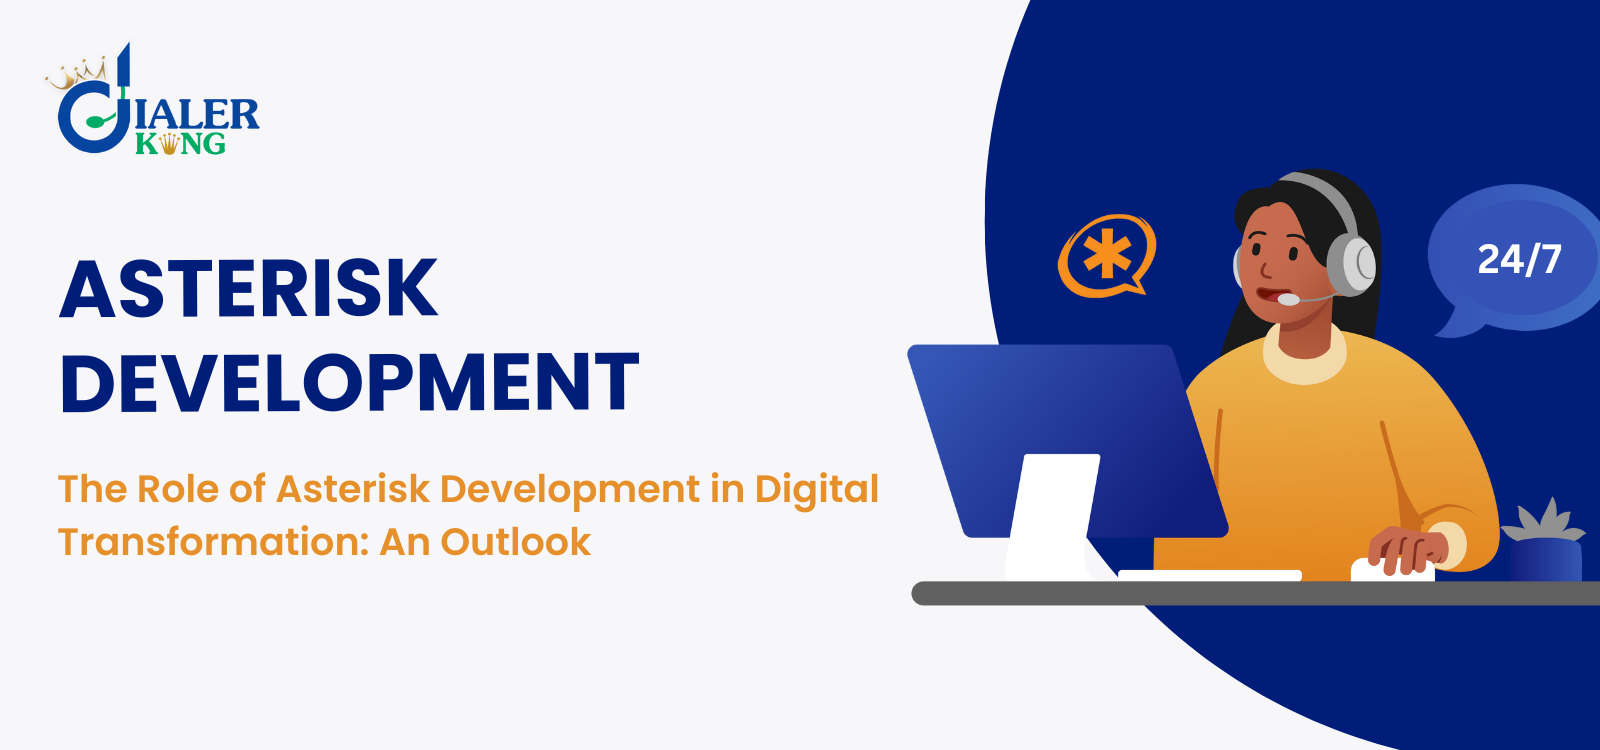 The Role of Asterisk Development in Digital Transformation An Outlook